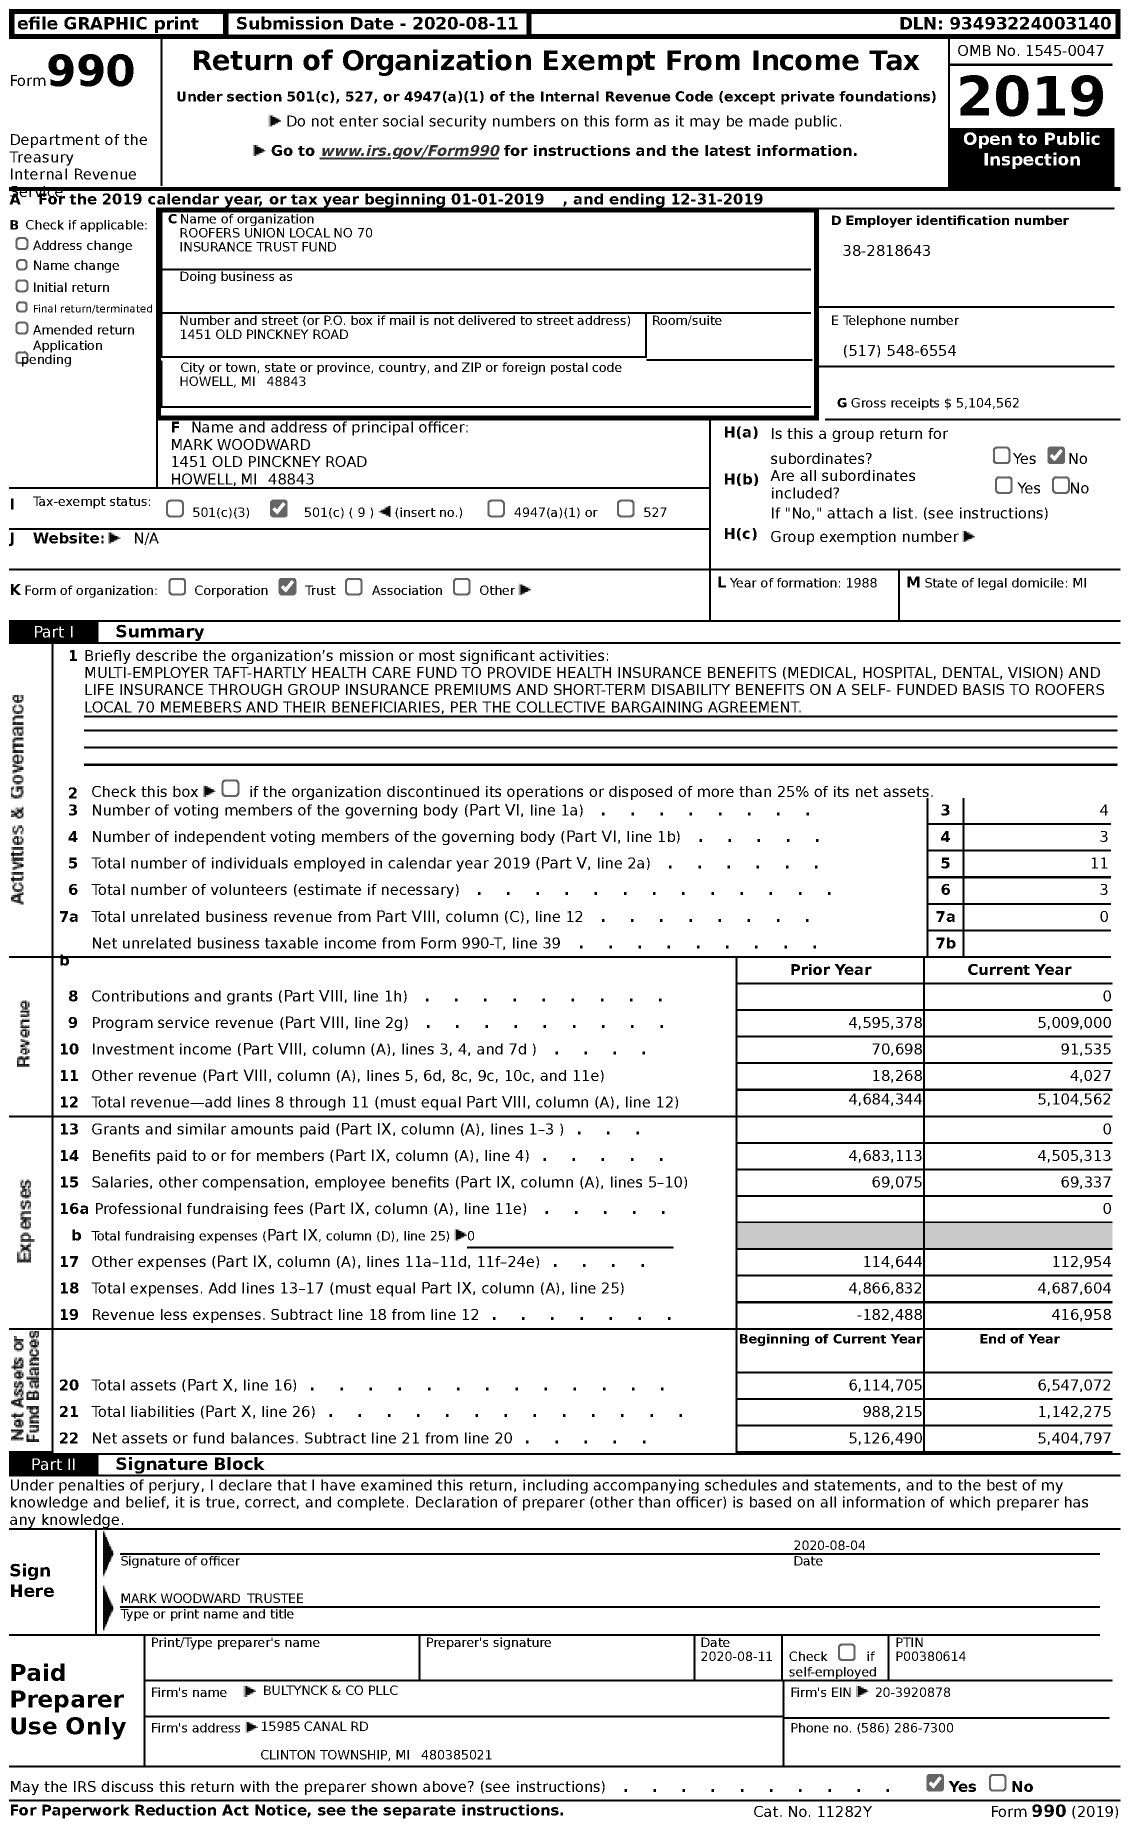 Image of first page of 2019 Form 990 for Roofers Union Local No 70 Insurance Trust Fund